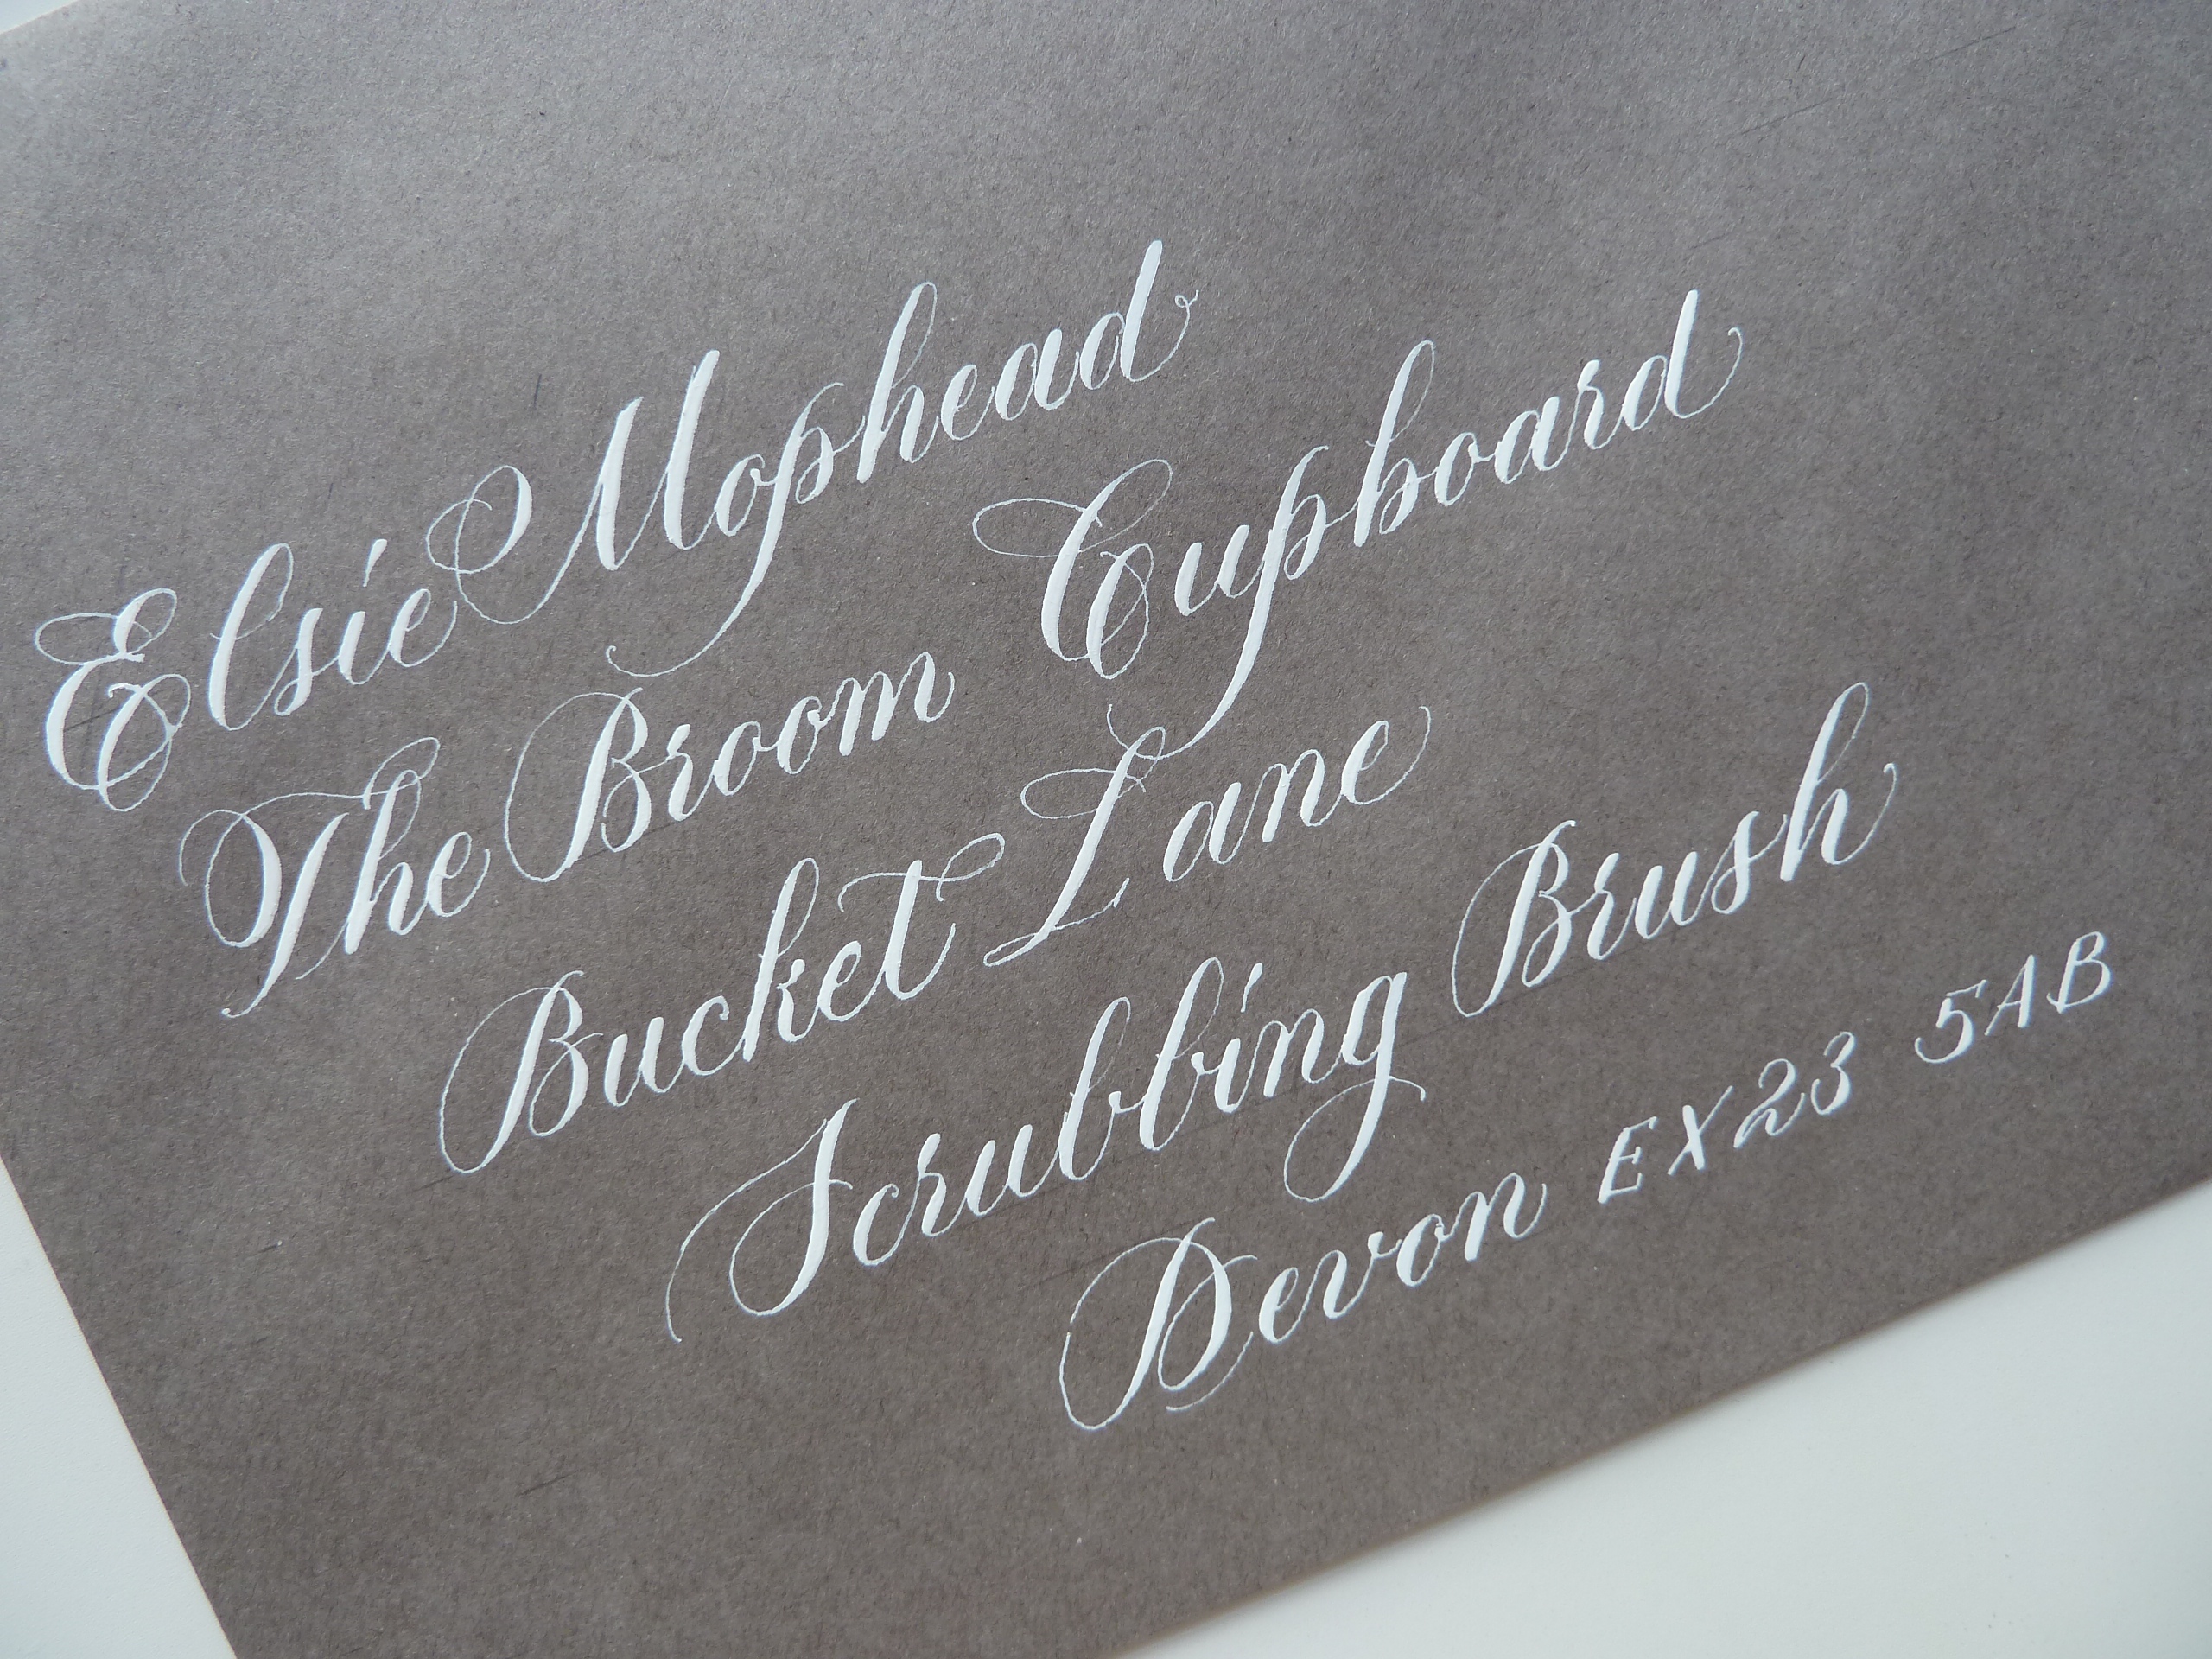 How to write calligraphy for invitations